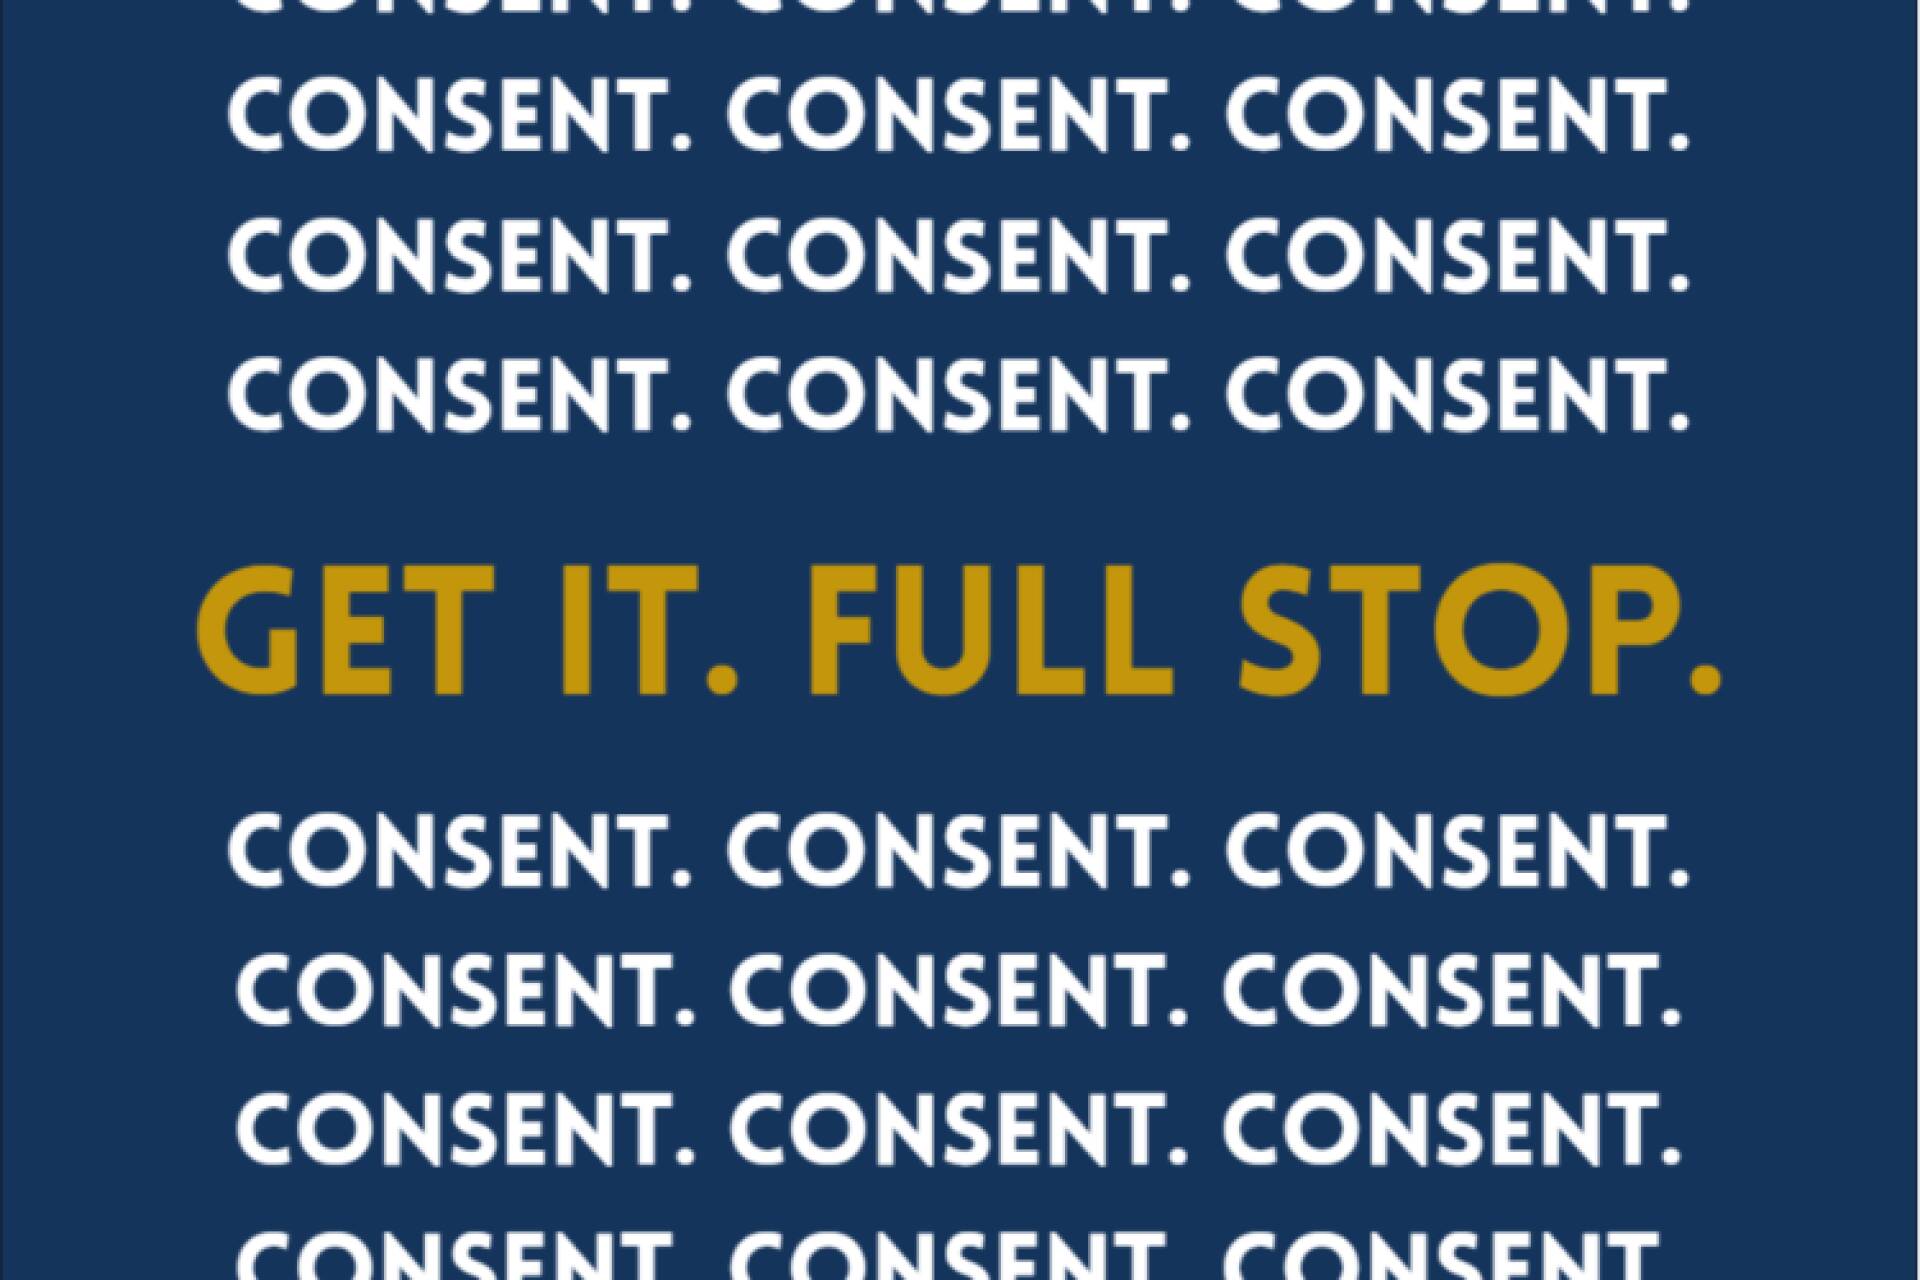 The text 'Get it. Full stop.' on a background of the word 'consent' repeated.